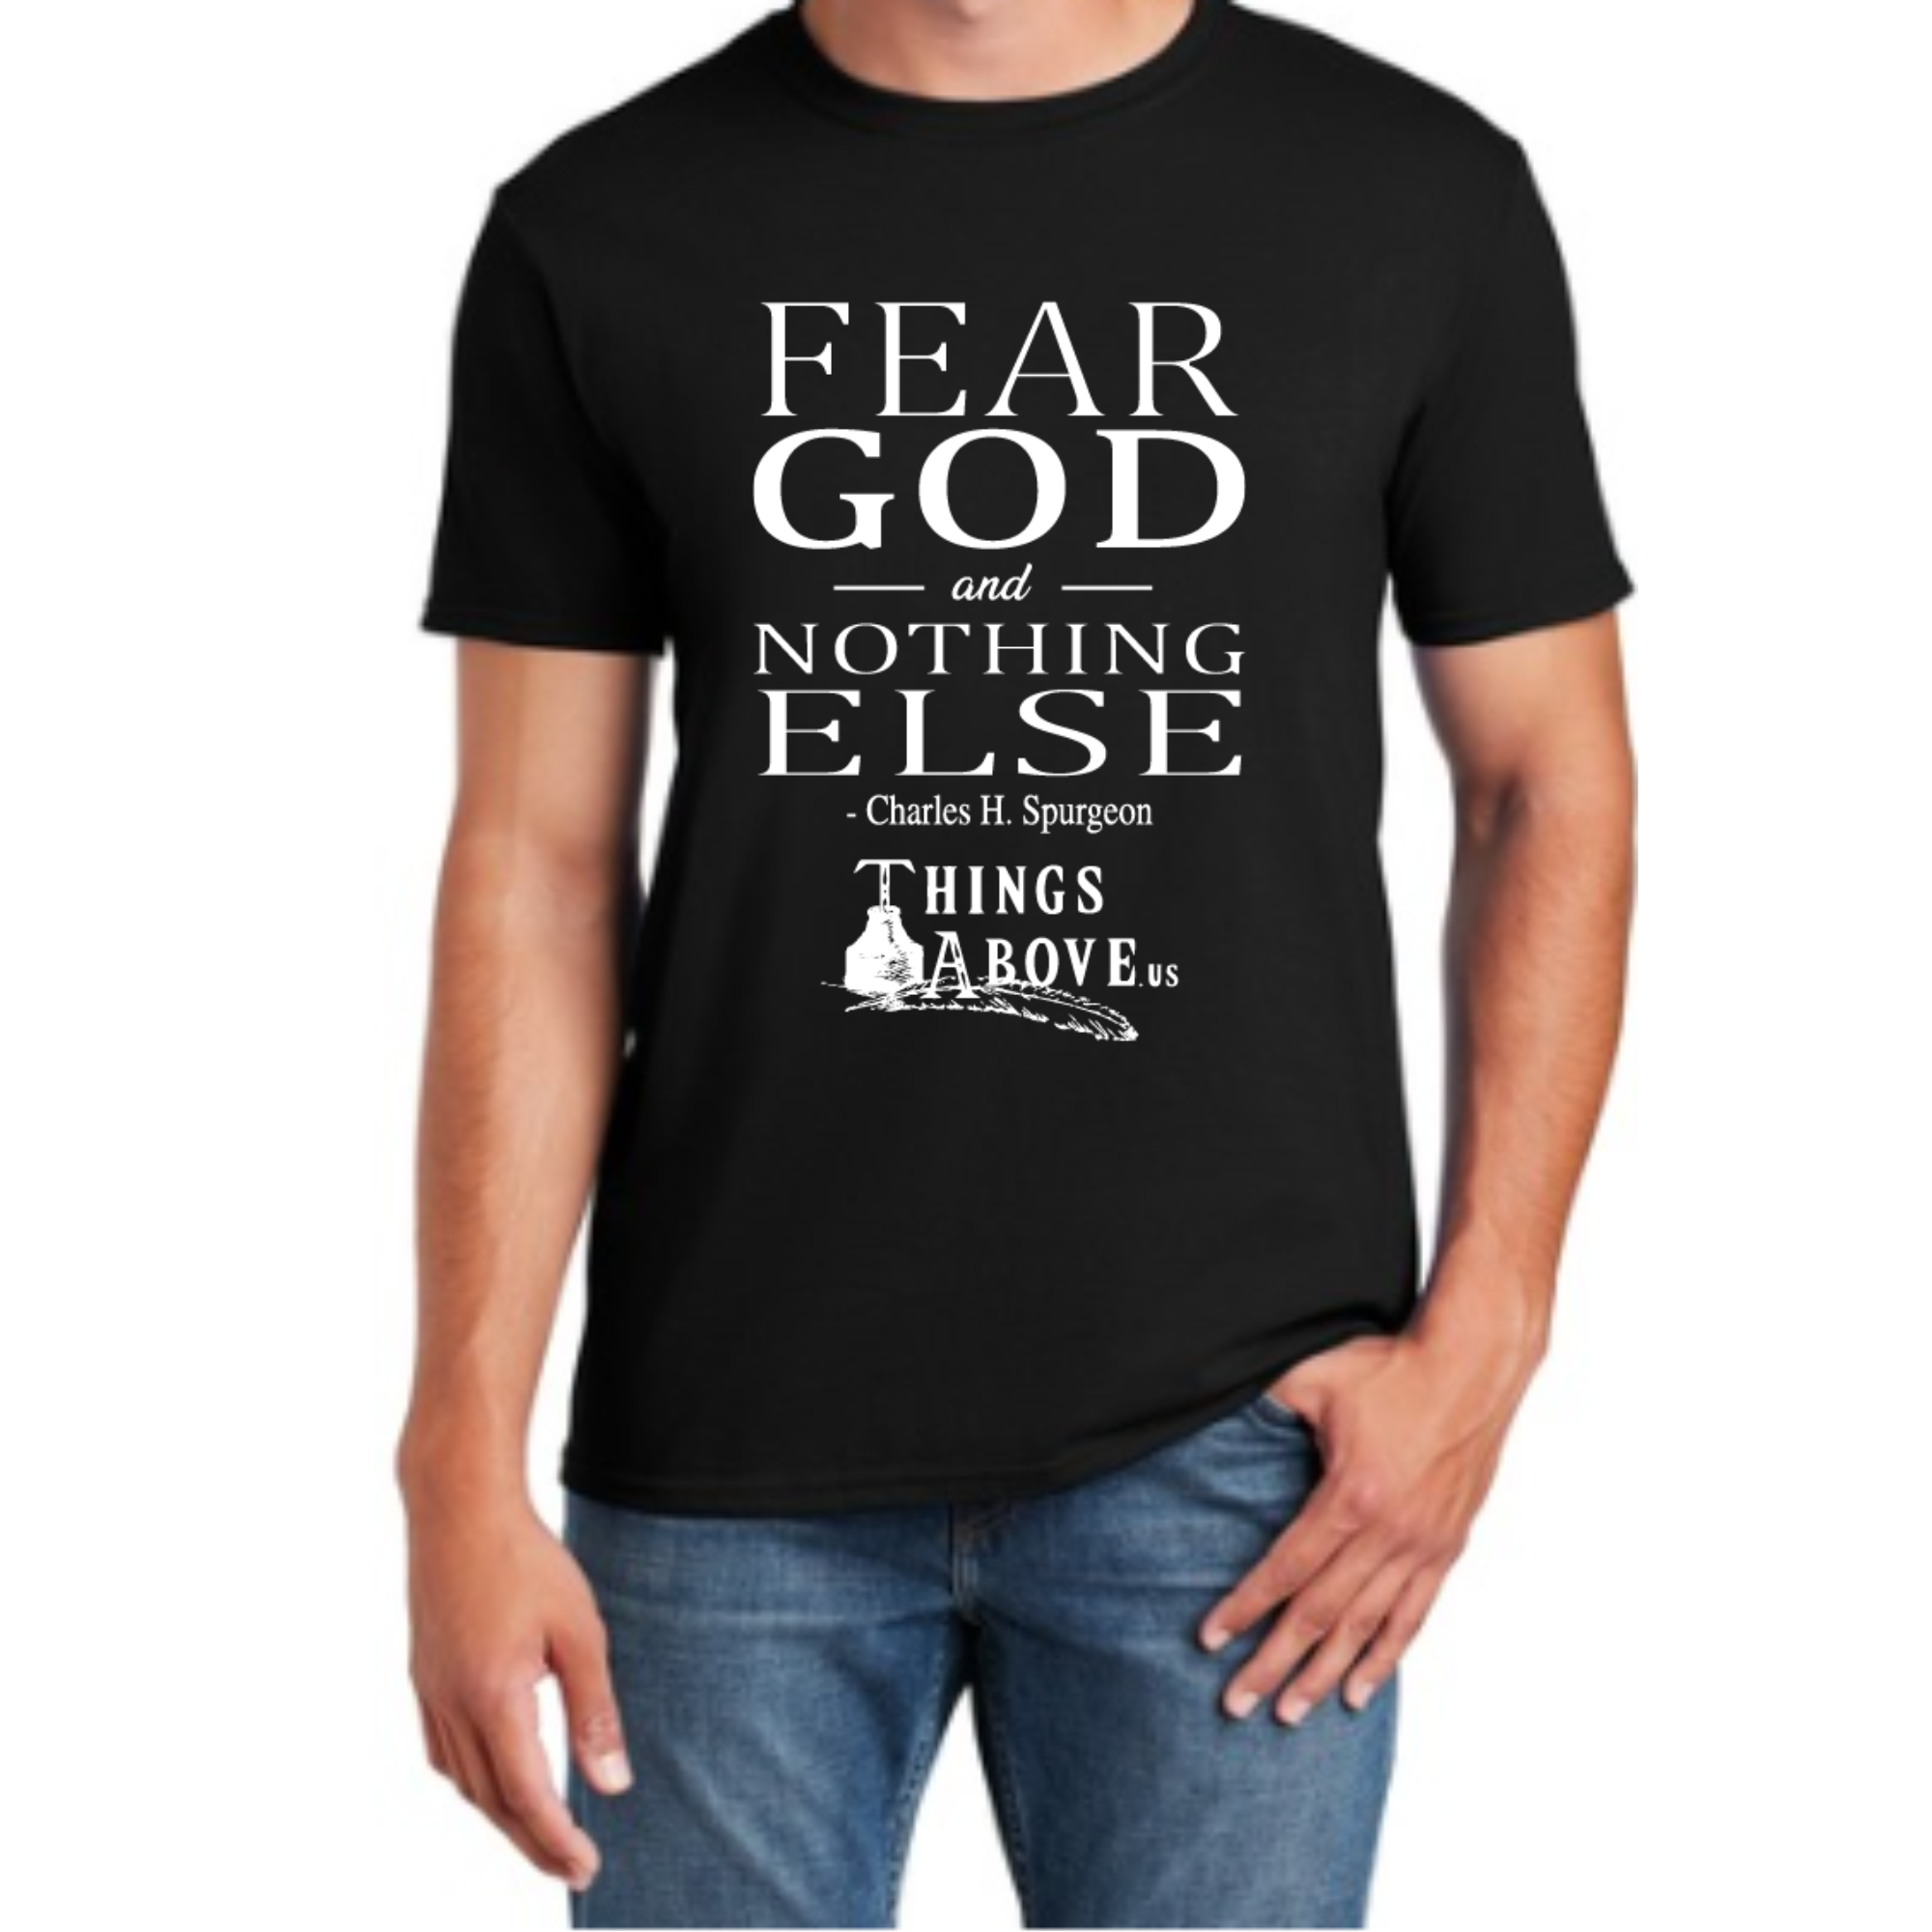 FEAR GOD and NOTHING ELSE T-SHIRT